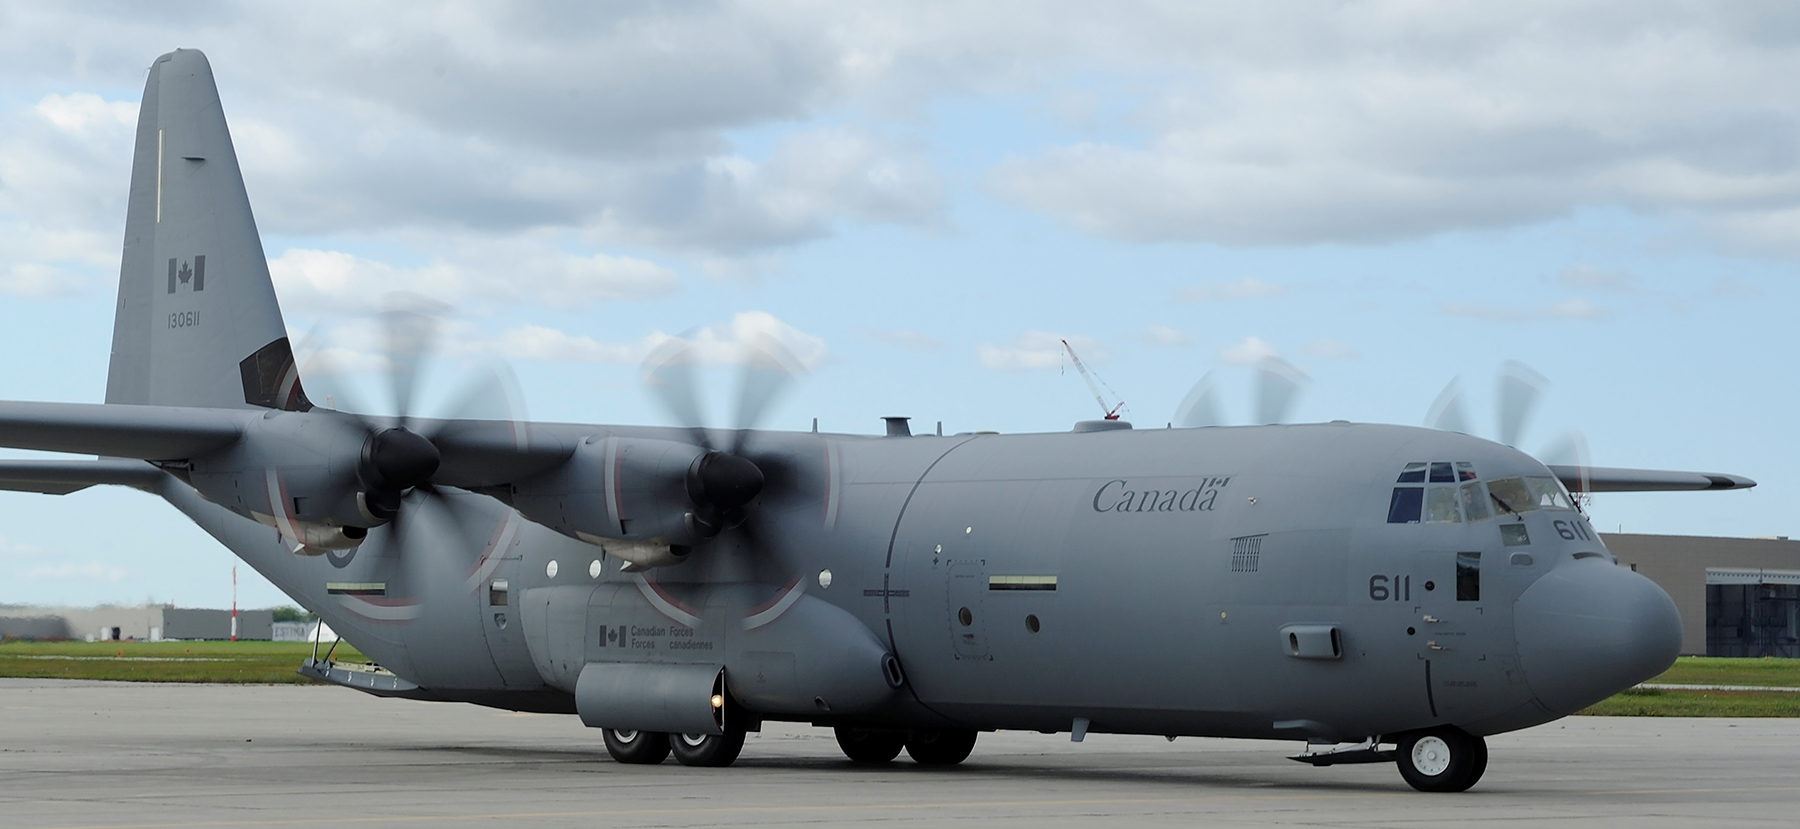 The new RCAF livery will replace the livery shown under the wing of a CC-130J Hercules on RCAF aircraft. The new paint scheme will be added to the aircraft when they undergo regularly scheduled repainting to correct the effects of usage and weather. PHOTO: Corporal Darcy Lefebvre, FA2011-0043-37